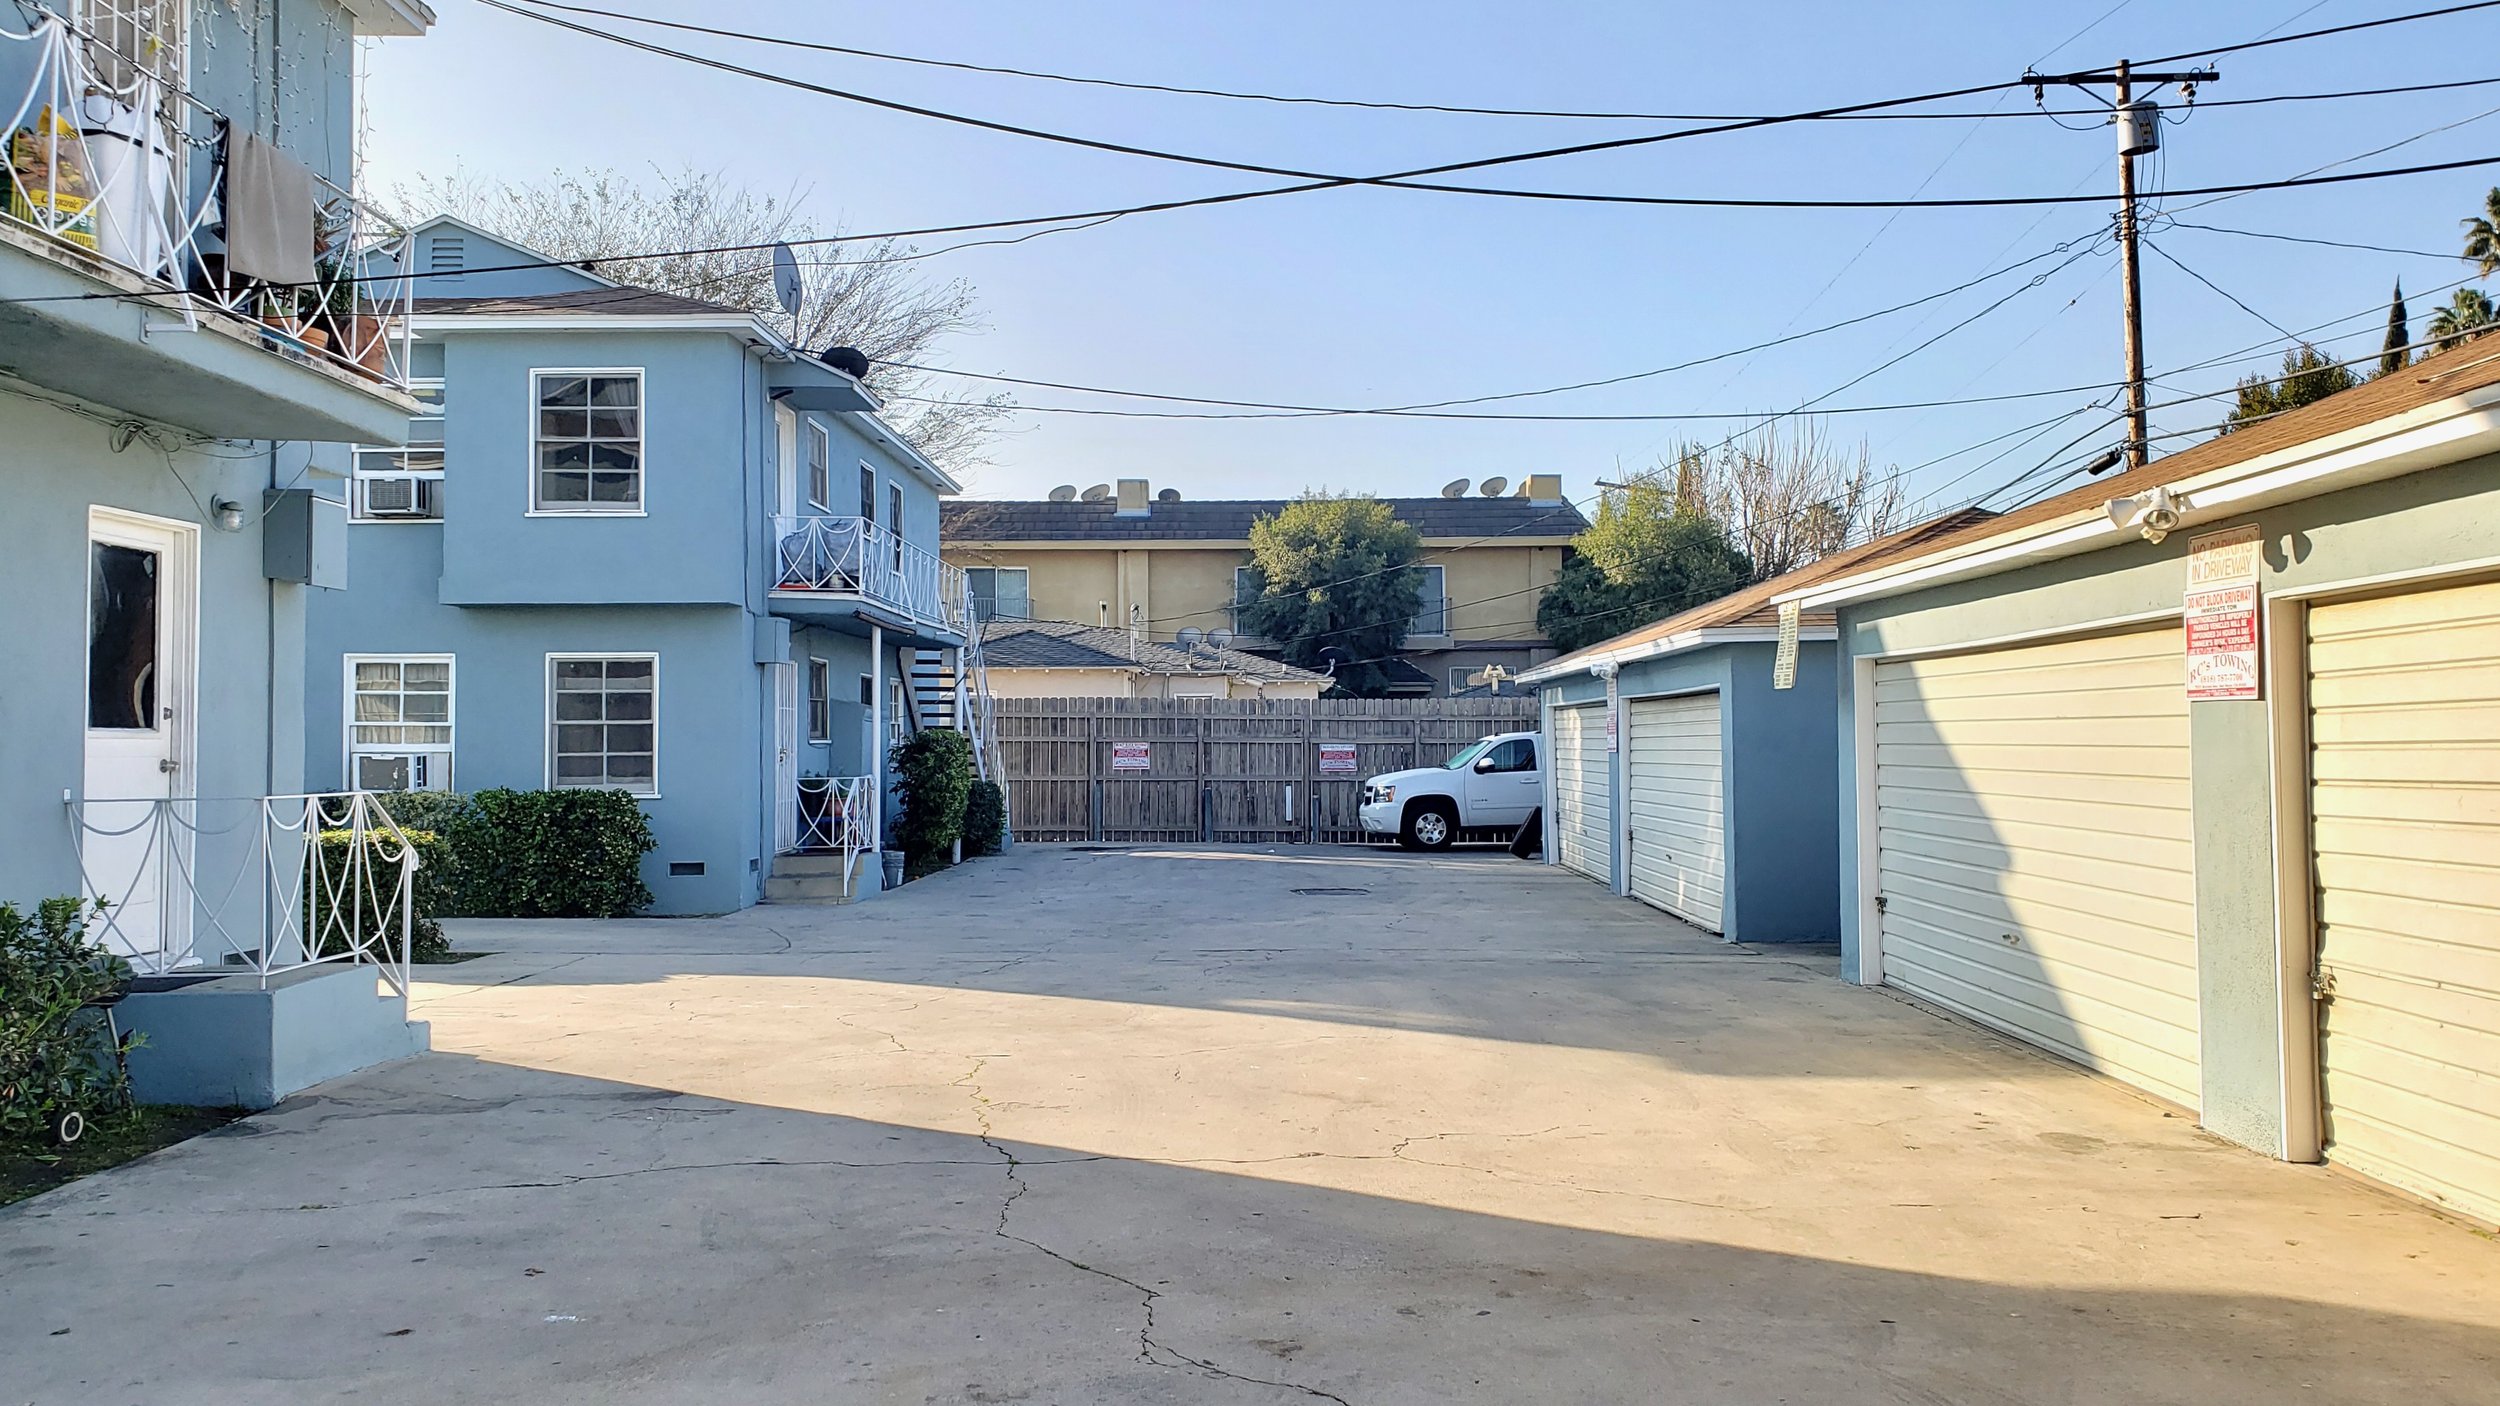 A spacious driveway with garages, a white truck, and a multi-unit light blue building under clear skies.